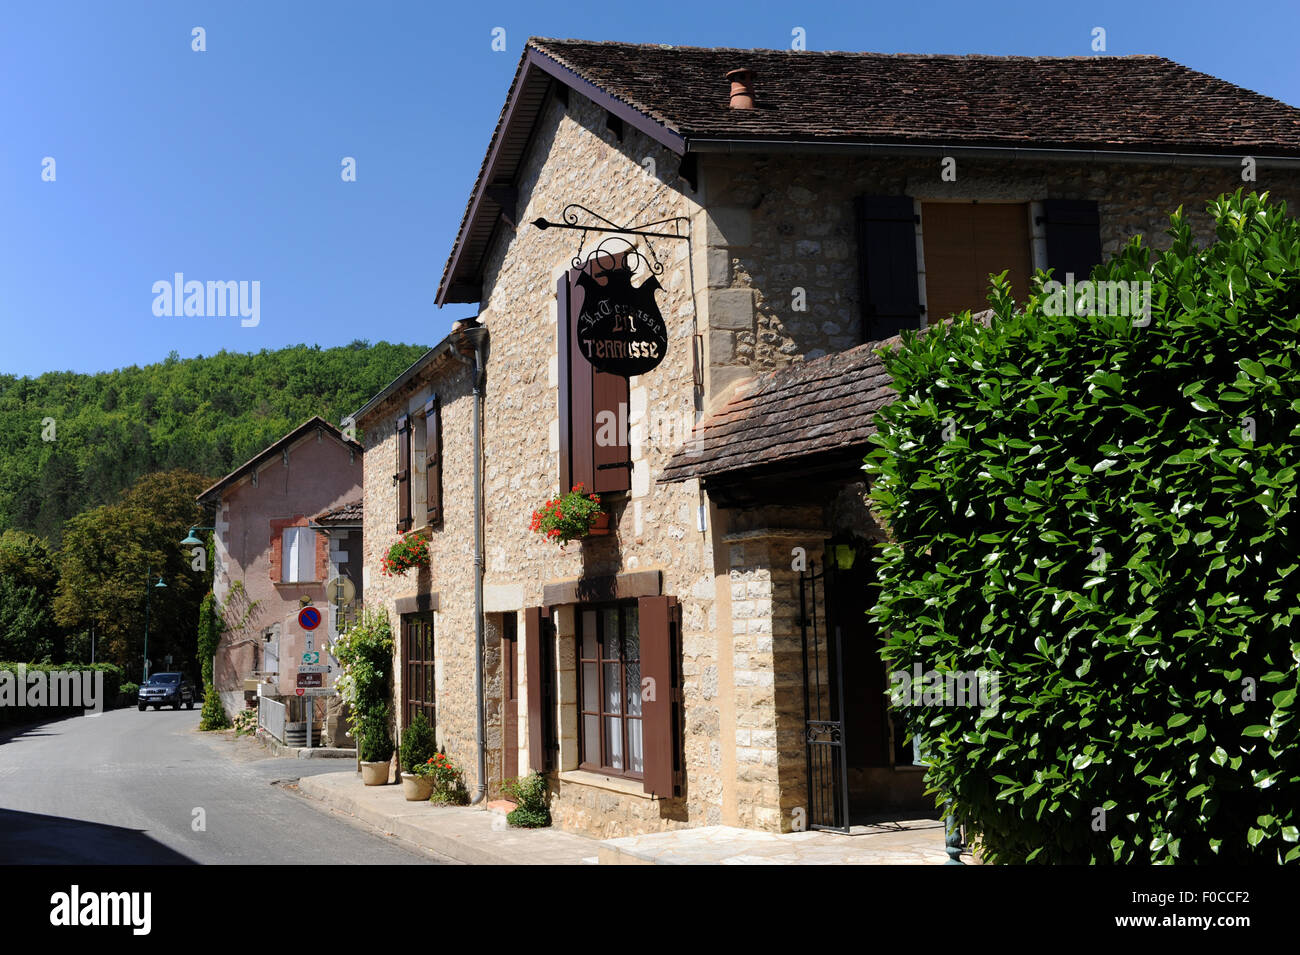 La Terrasse restaurant in the small village of Grezels a small village located south of France. Stock Photo